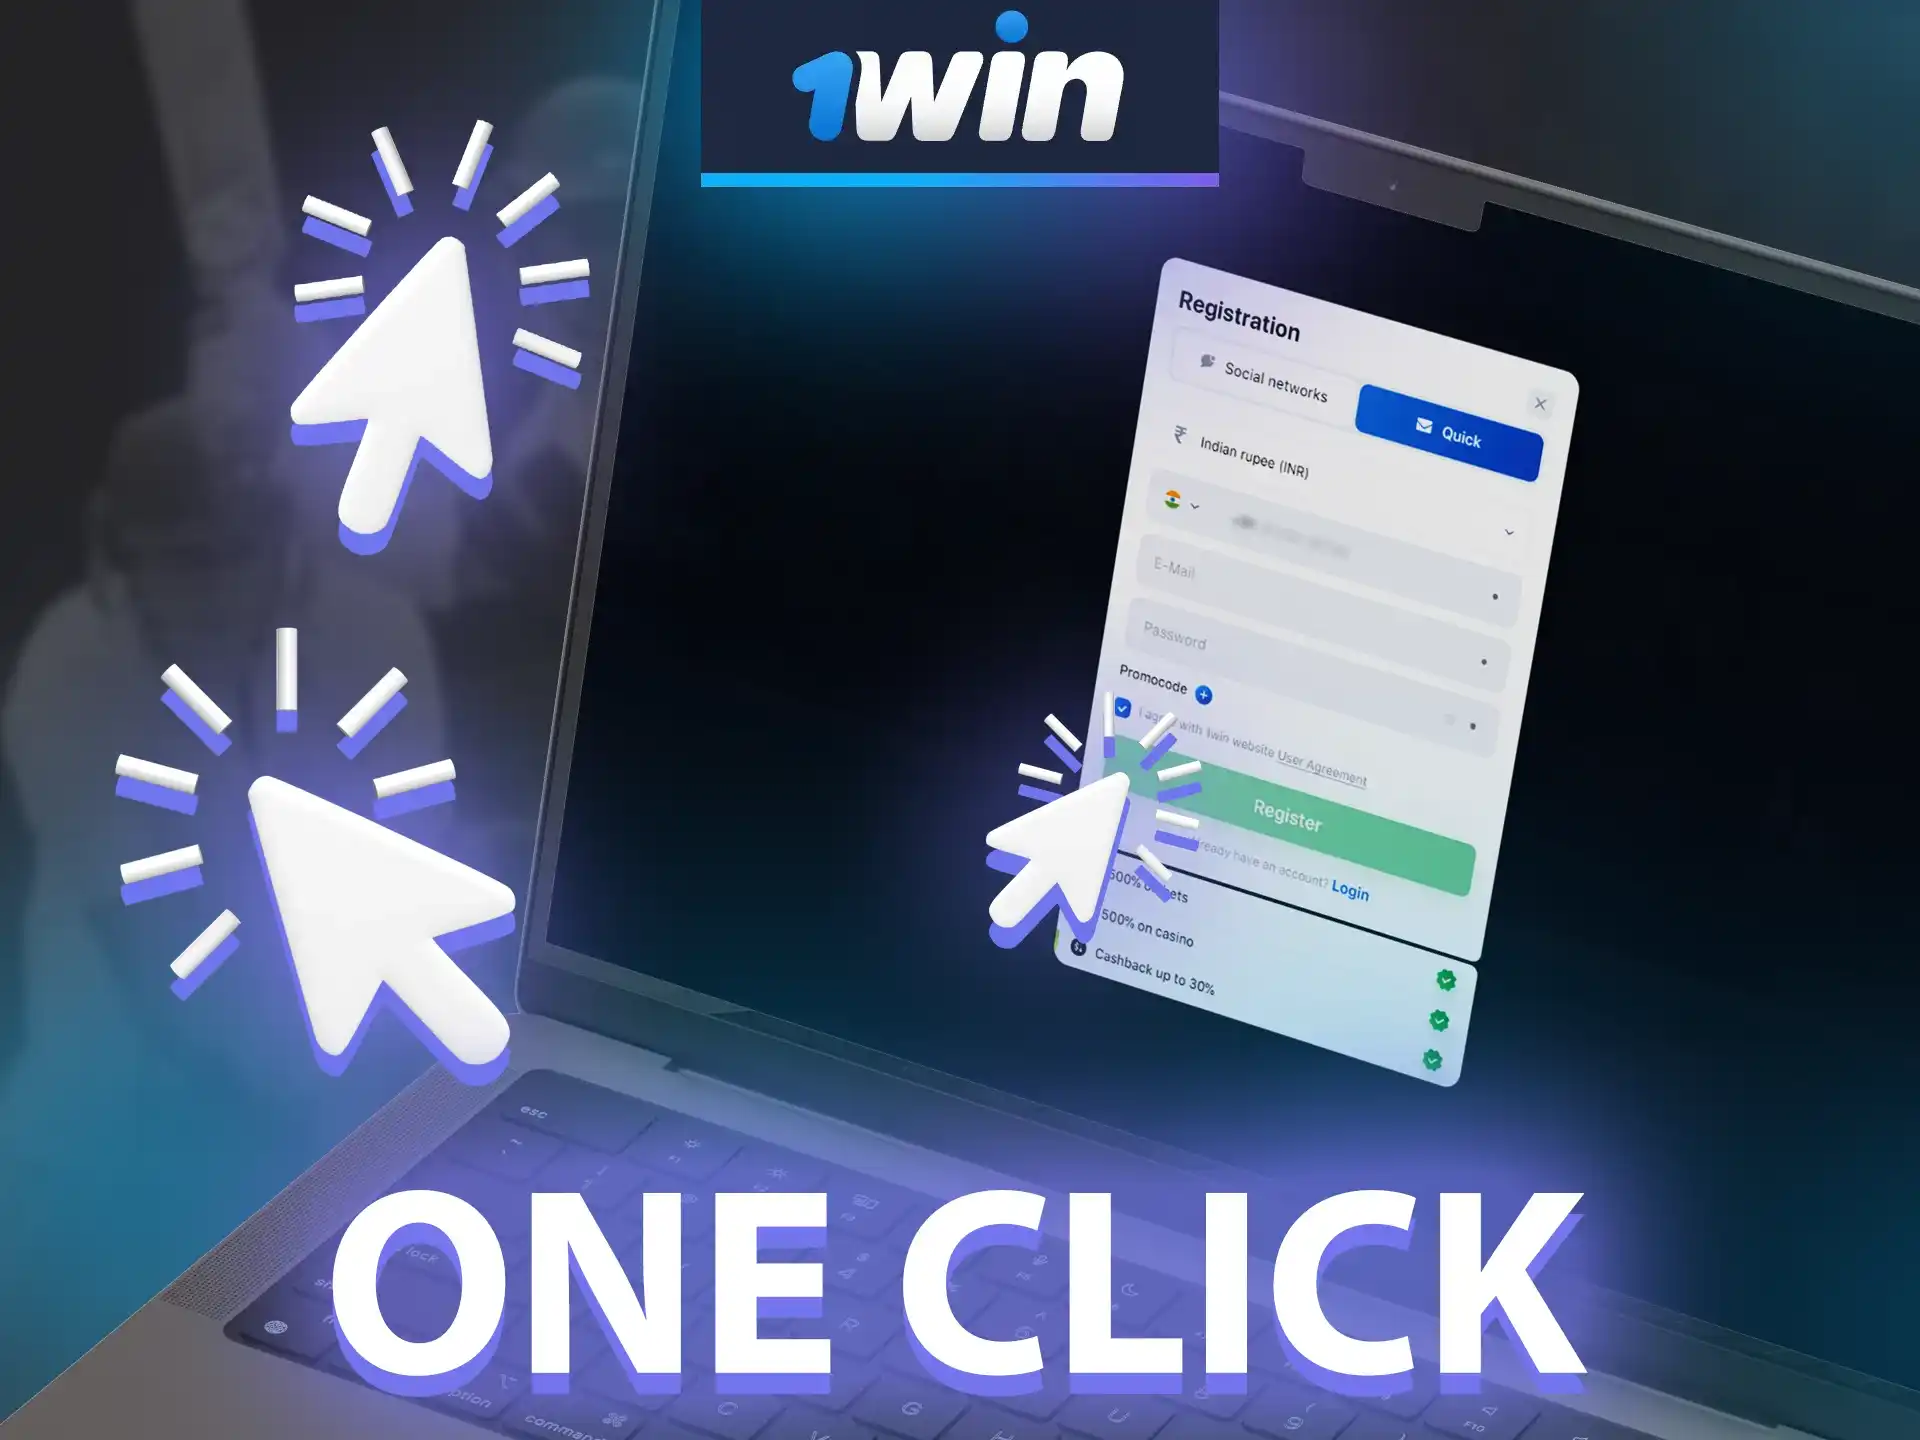 1win offers a quick one-click registration option.